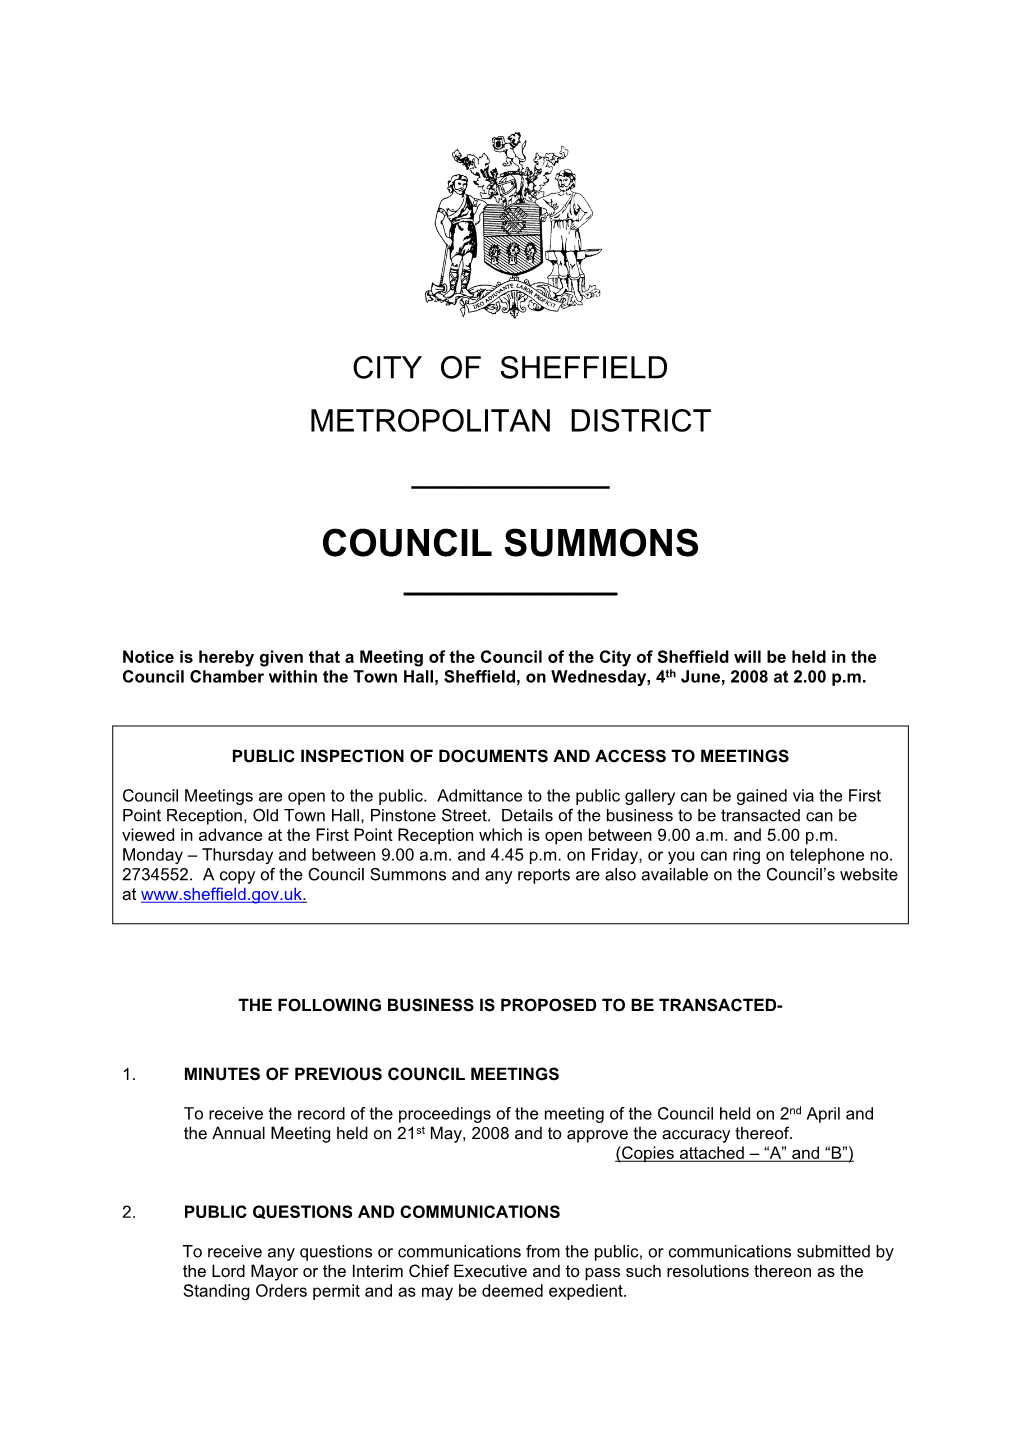 Council Summons ______